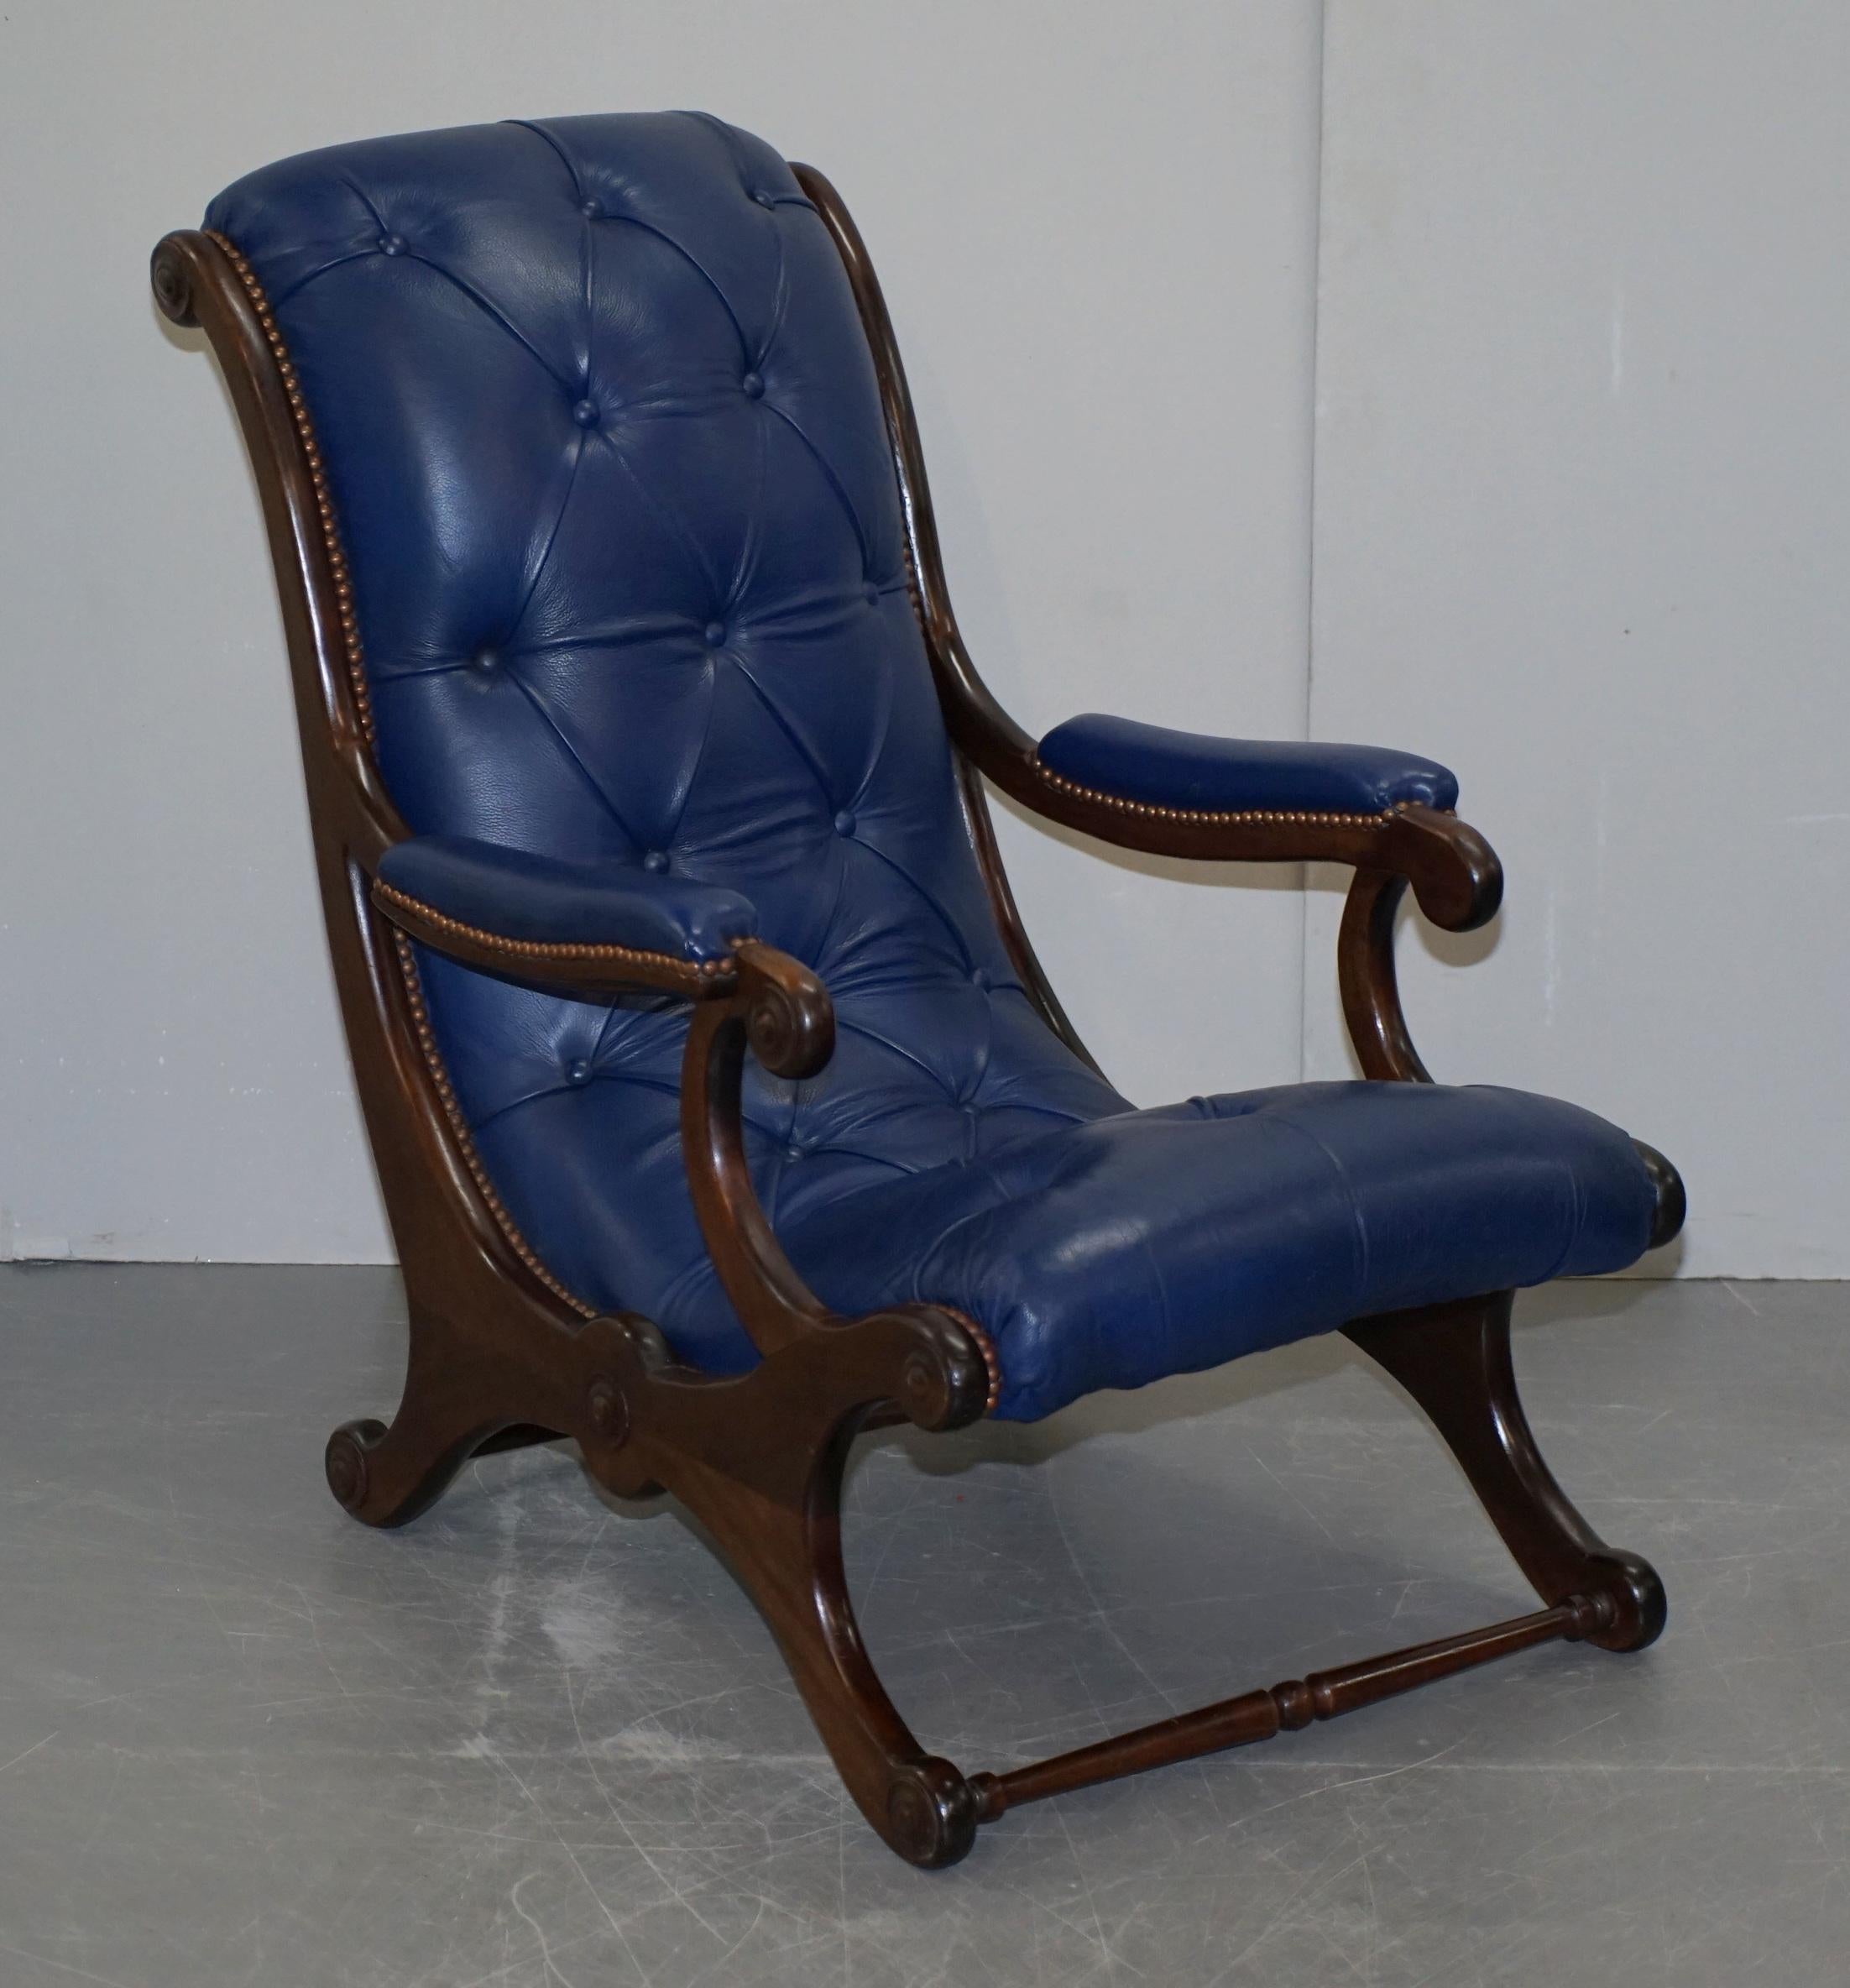 We are delighted to this lovely set of original Victorian Napoleonic royal blue chesterfield library, slipper, reading armchairs

A very good looking and well-made pair. These are the originals made in the late Victorian era not the modern “in